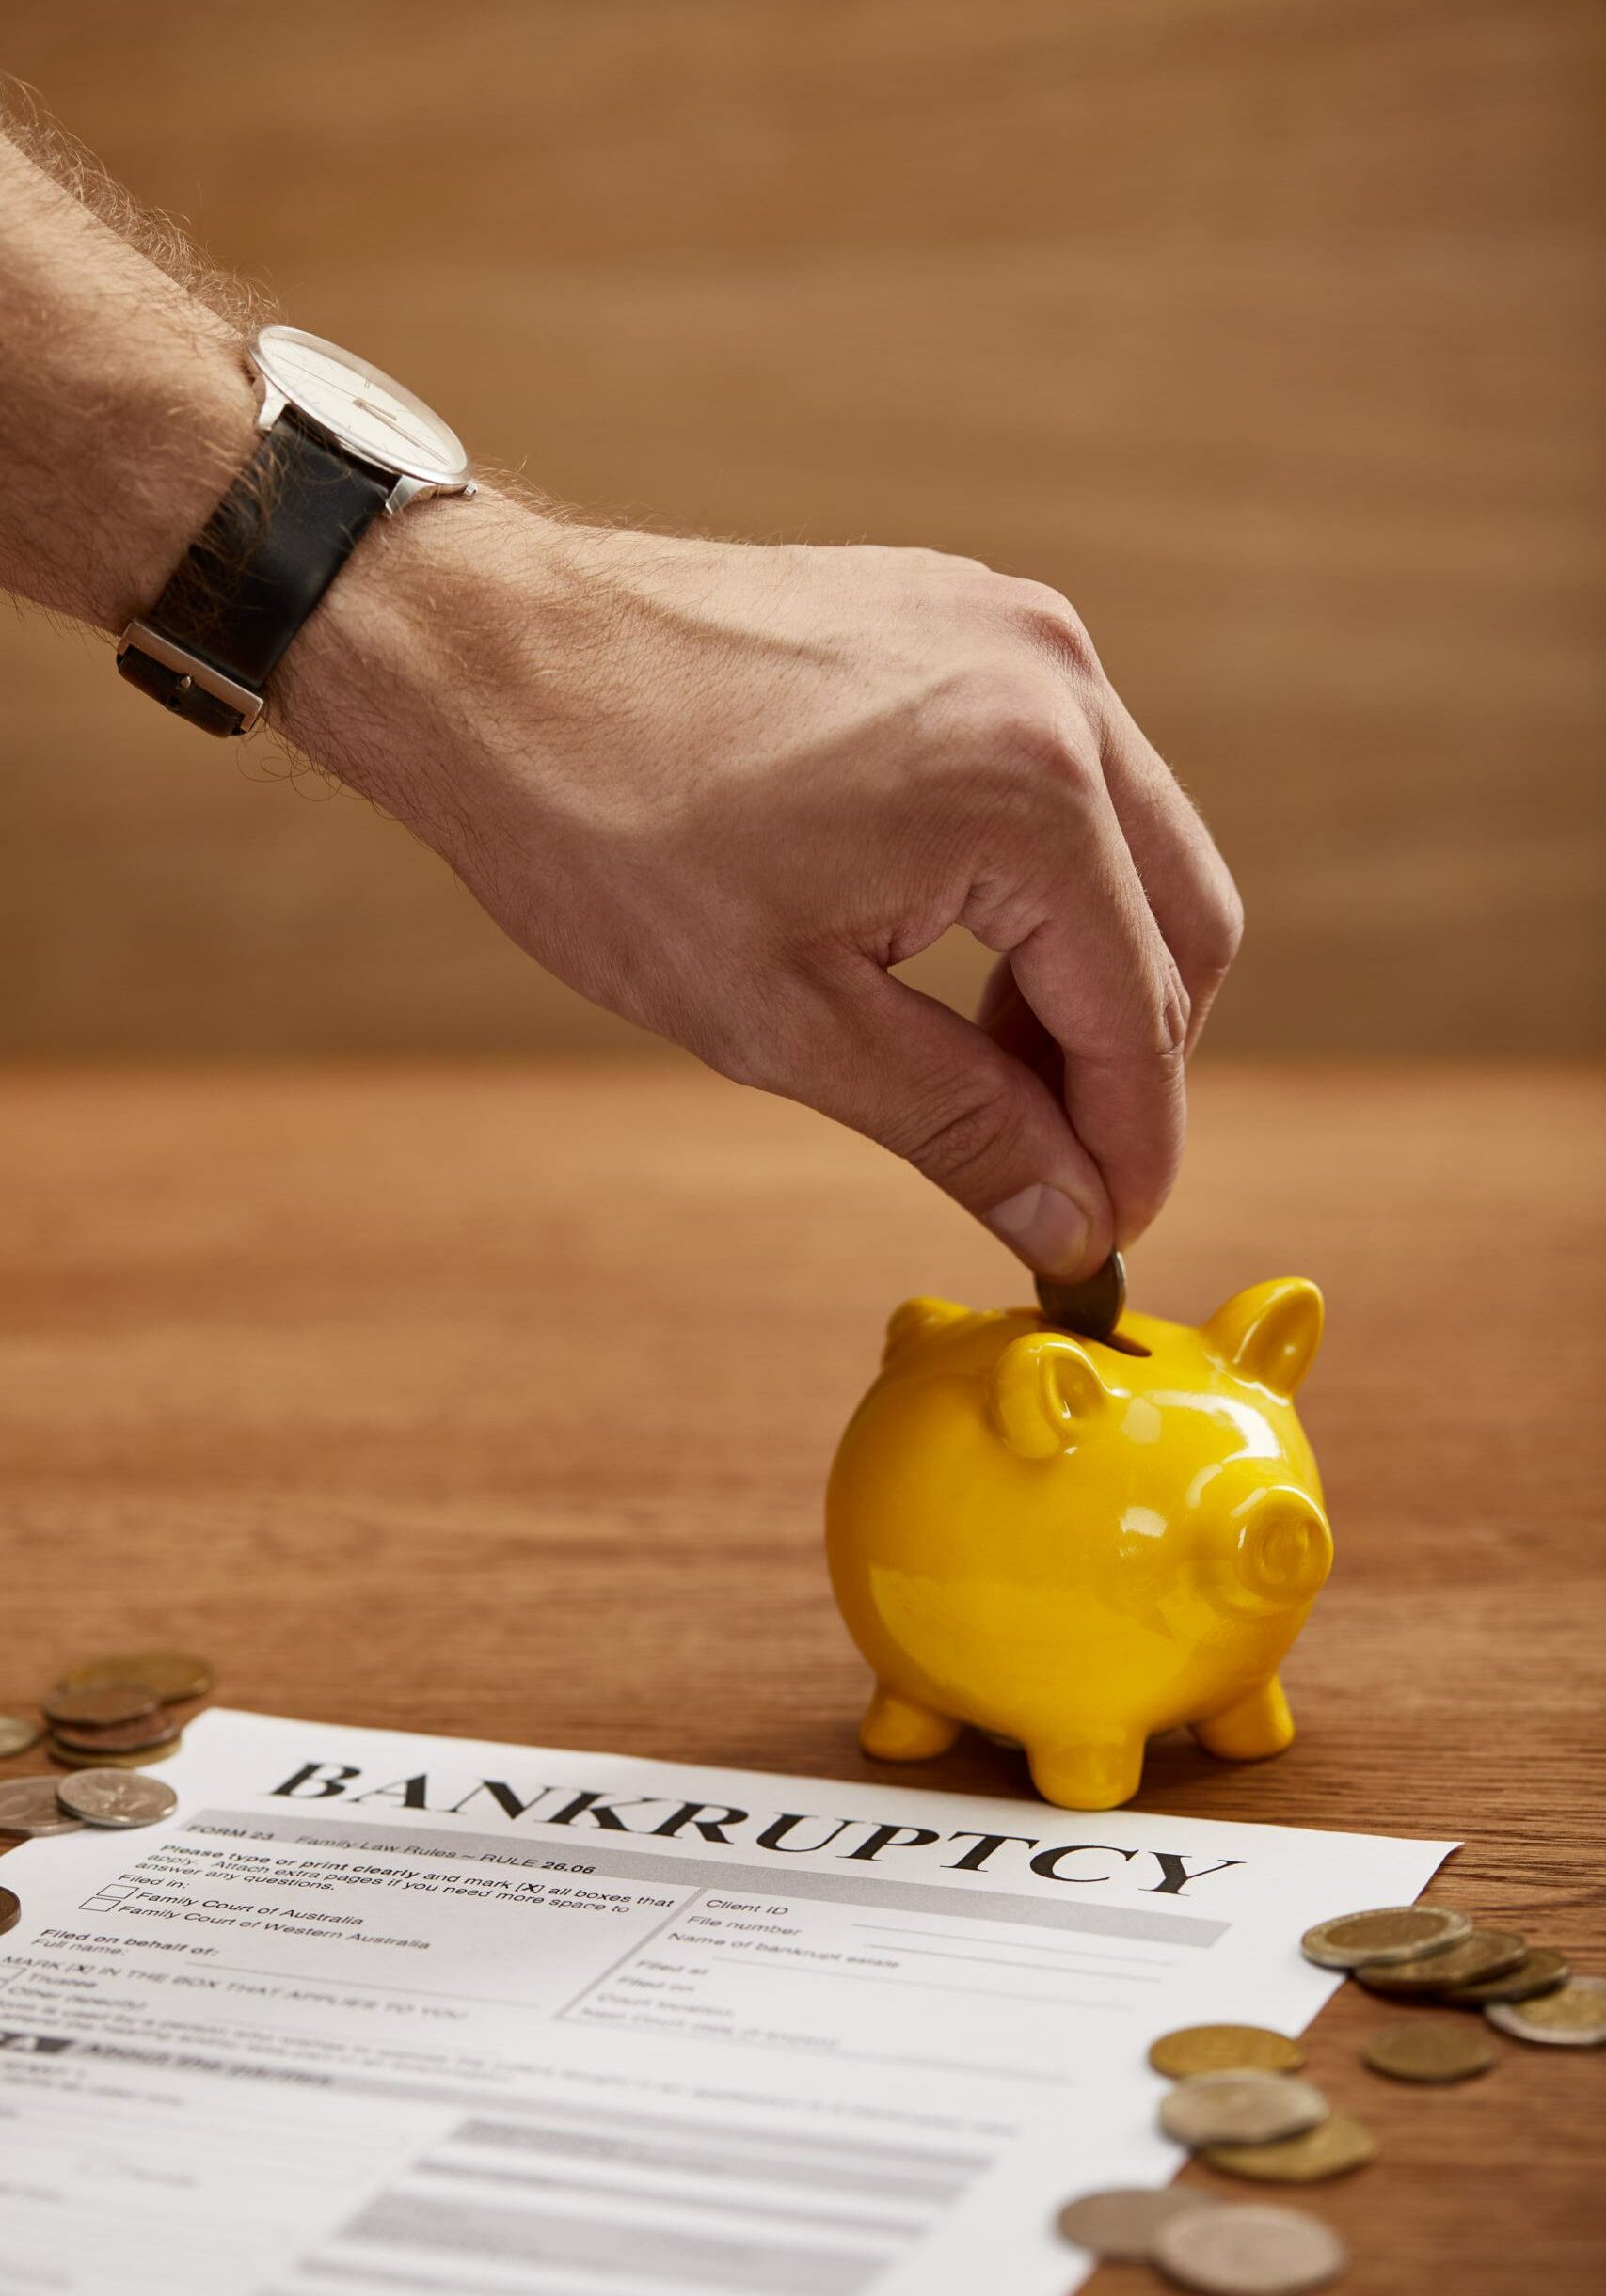 saving money for chapter 11 bankruptcy filing